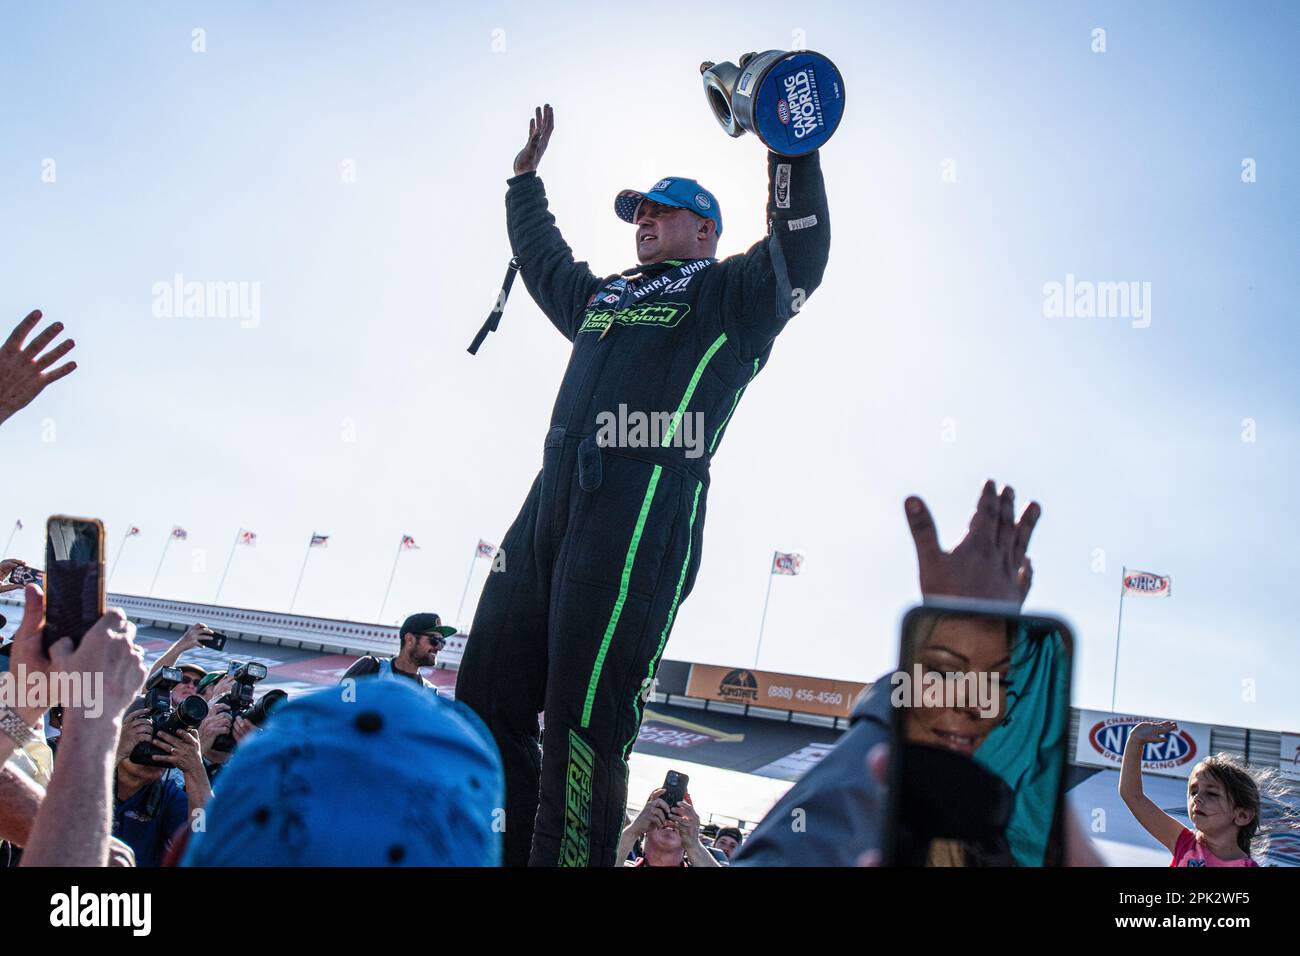 Pomona, United States. 02nd Apr, 2023. Matt Hagan holds up his trophy after taking the win in the Top Fuel division of the Lucas Oil Winternationals. Professional Drag racers nationwide rally together to compete at the Lucas Oil NHRA Winternationals held at the In-N-Out Burger Pomona Dragstrip for the 63rd consecutive year. Drivers battled over a three-day period starting on March 31st and concluding on April 2, fighting to take the titles in each of their divisions. Credit: SOPA Images Limited/Alamy Live News Stock Photo